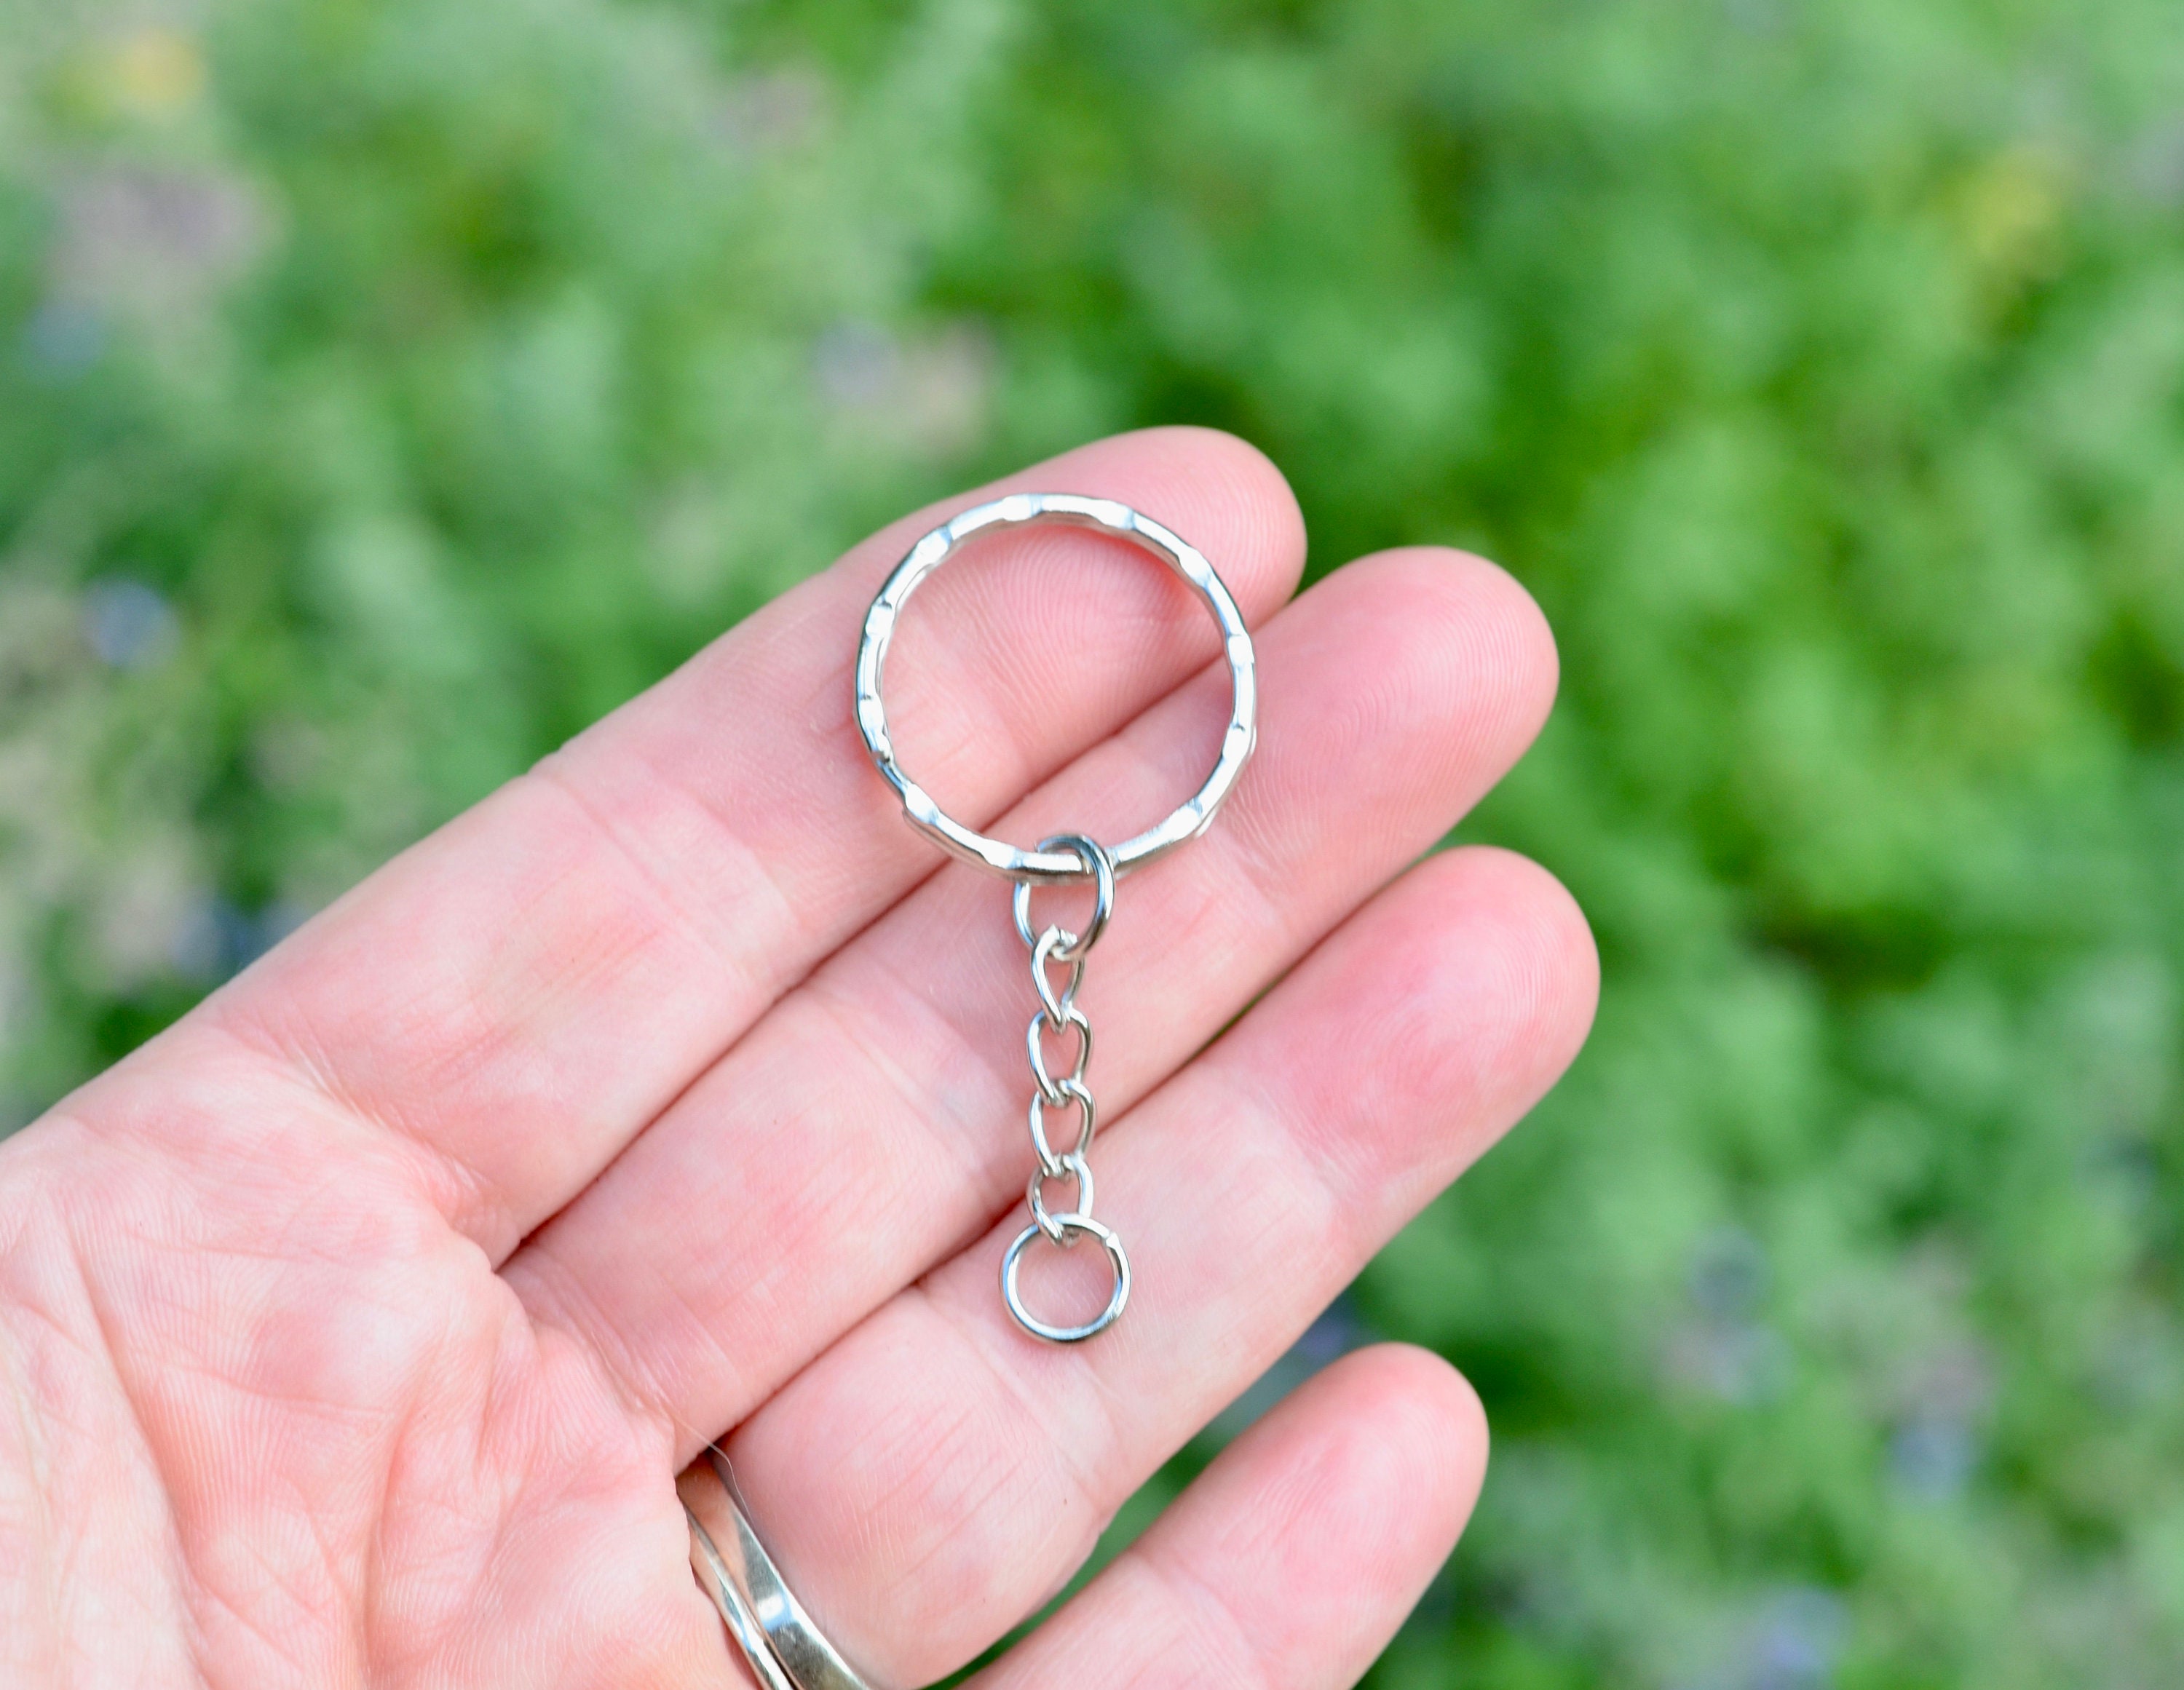 Ten (10) - Silver Key Chain Rings with Attached Chain, 1 Inch Split Key  Chain Ring, 25mm Split Key Ring Chain, Keychain FOB, Split Key Ring